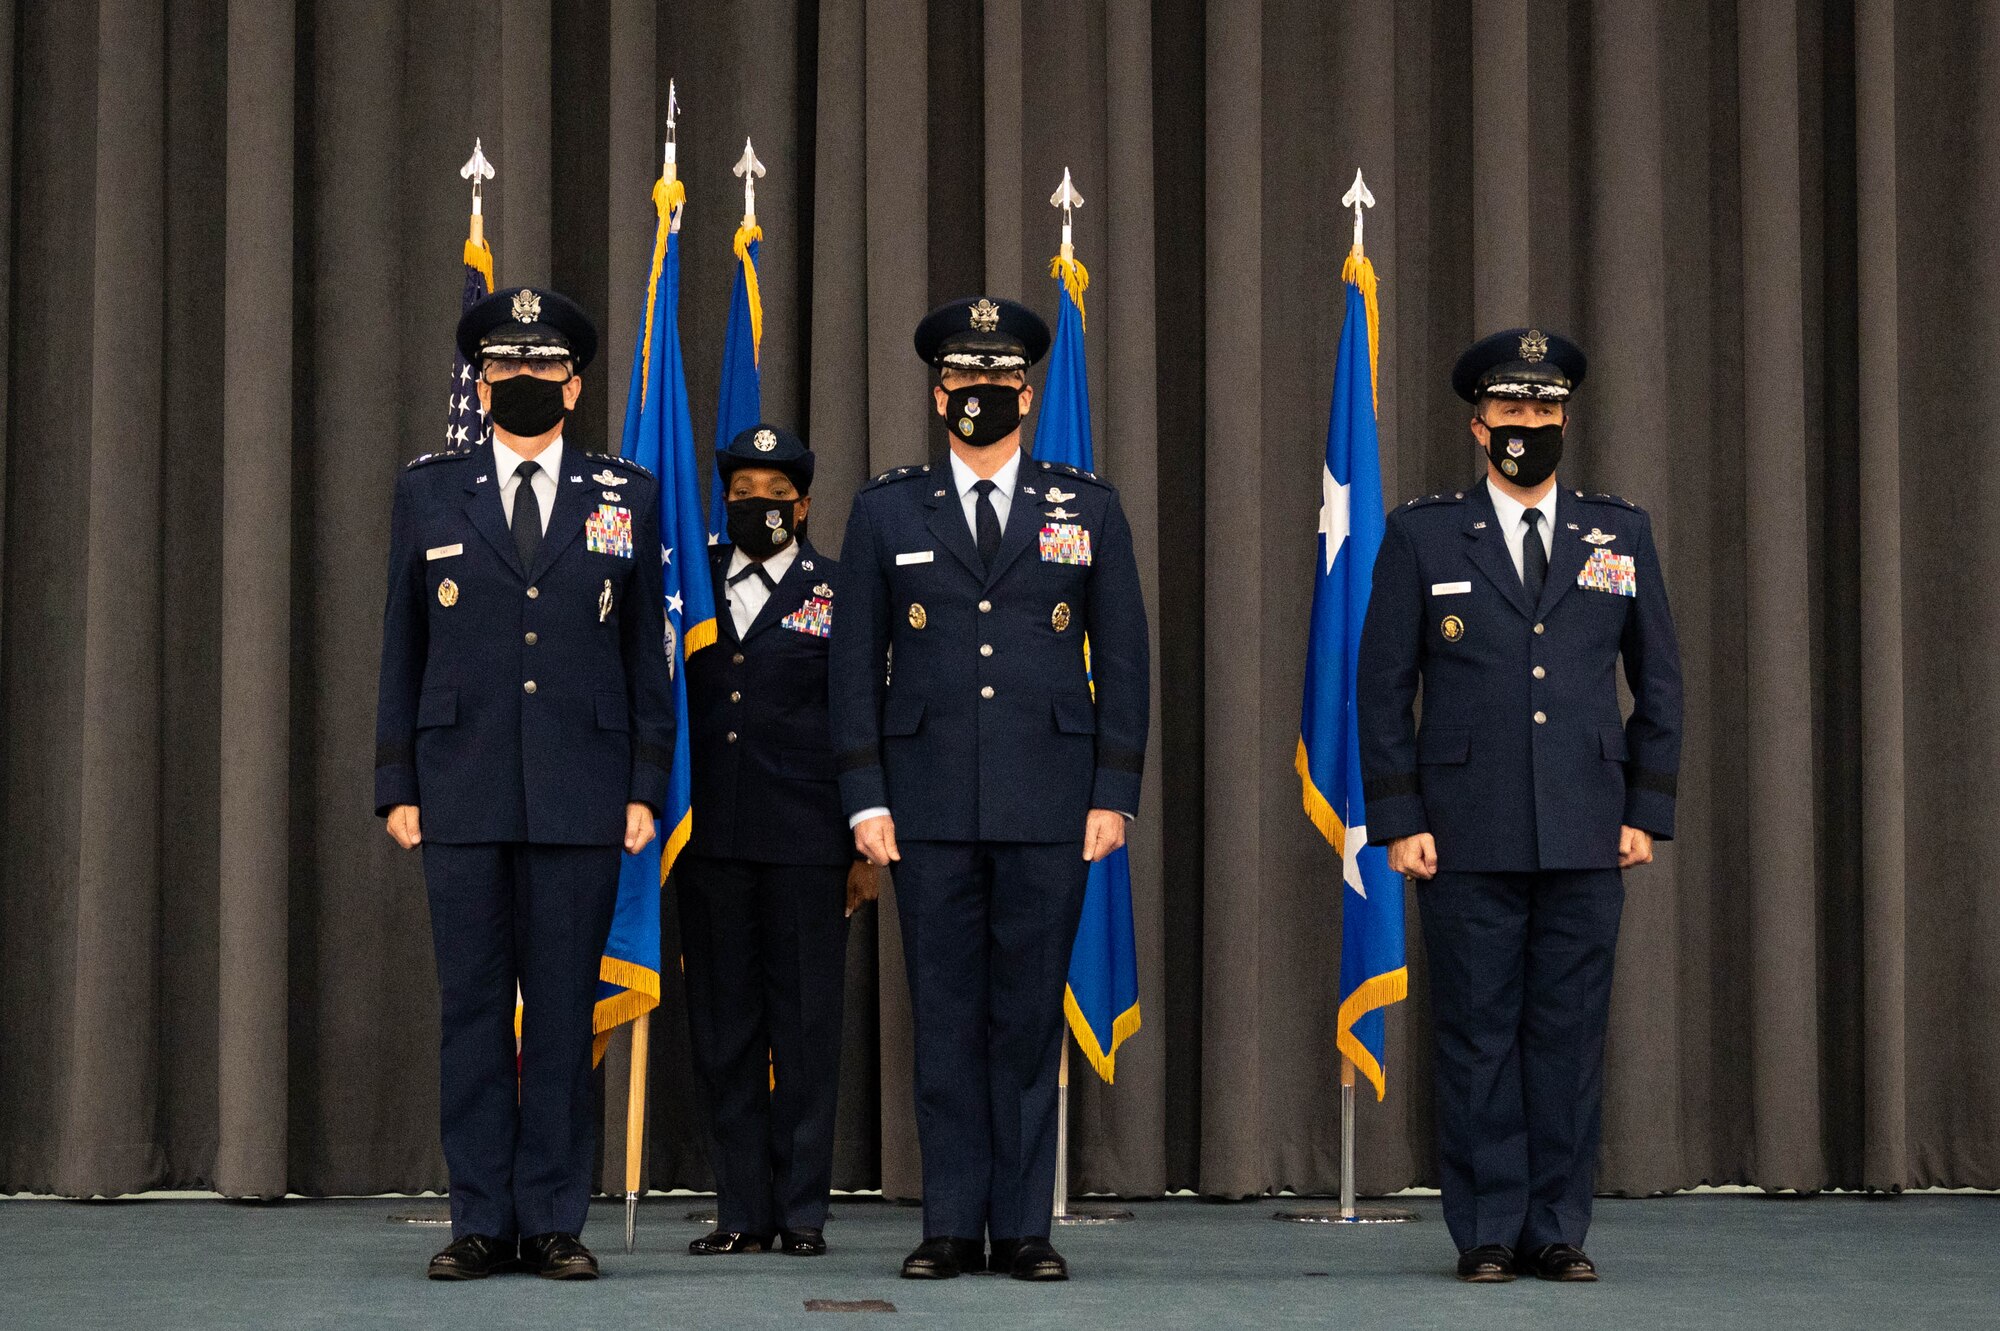 Gen. Tim Ray, left, commander of Air Force Global Strike Command, Lt. Gen. (select) Mark Weatherington, center, outgoing 8th Air Force and Joint-Global Strike Operations Center commander, and Maj. Gen. Andrew Gebara, incoming 8th Air Force and J-GSOC commander, stand at attention during  a change of command ceremony at Barksdale Air Force Base, La., August 16, 2021. A change of command is a military tradition that represents a formal transfer of authority and responsibility for a unit from one commanding or flag officer to another. (U.S. Air Force photo by Staff Sgt. Bria Hughes)